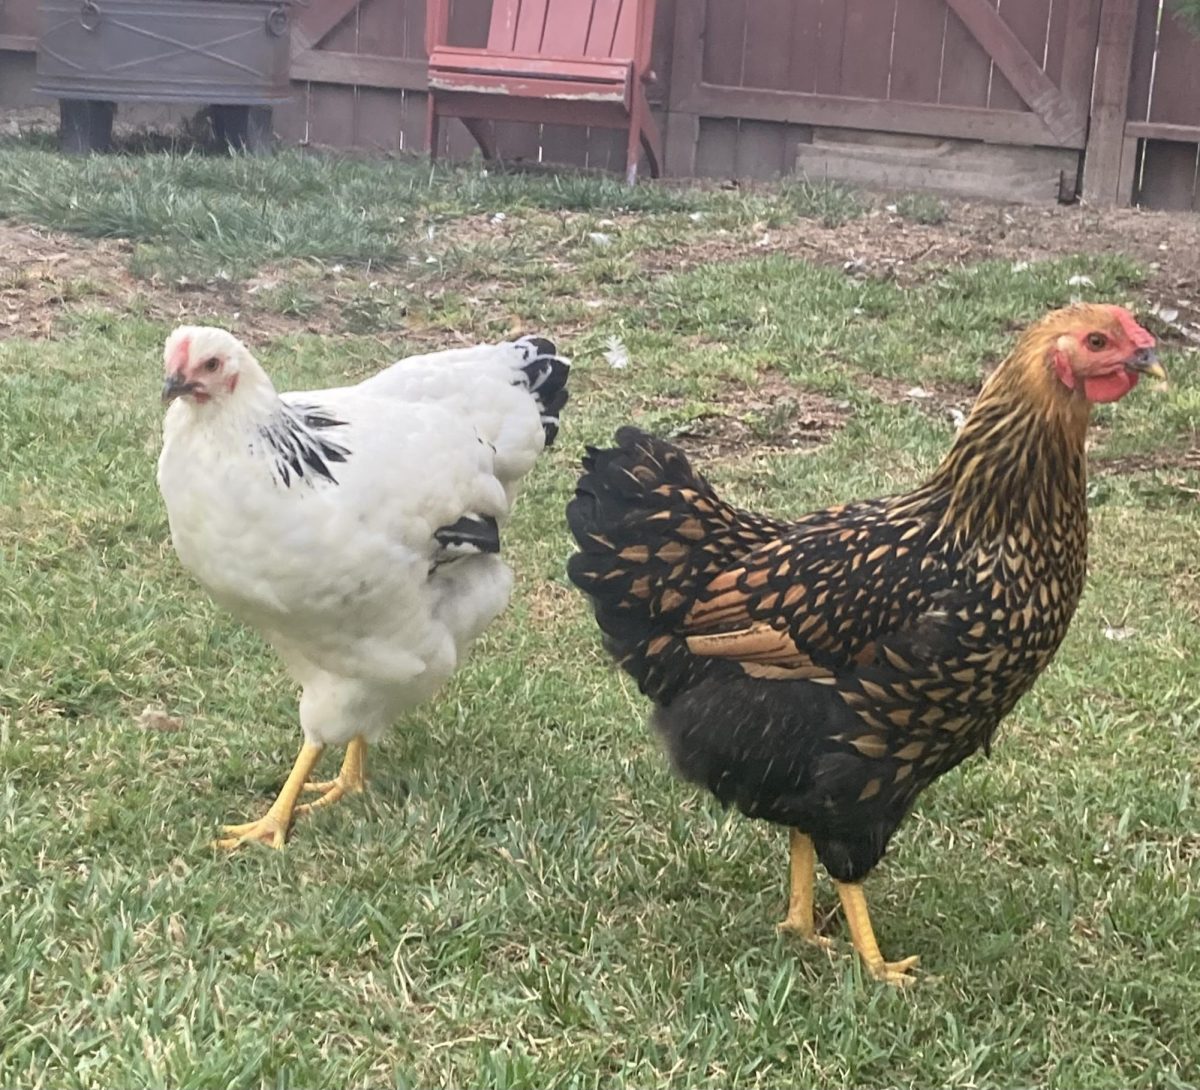 Chickens+make+wonderful+pets+if+you+have+the+right+resources+and+time+to+accommodate+to+their+everyday+needs+%28this+includes+their+little+poops%29.